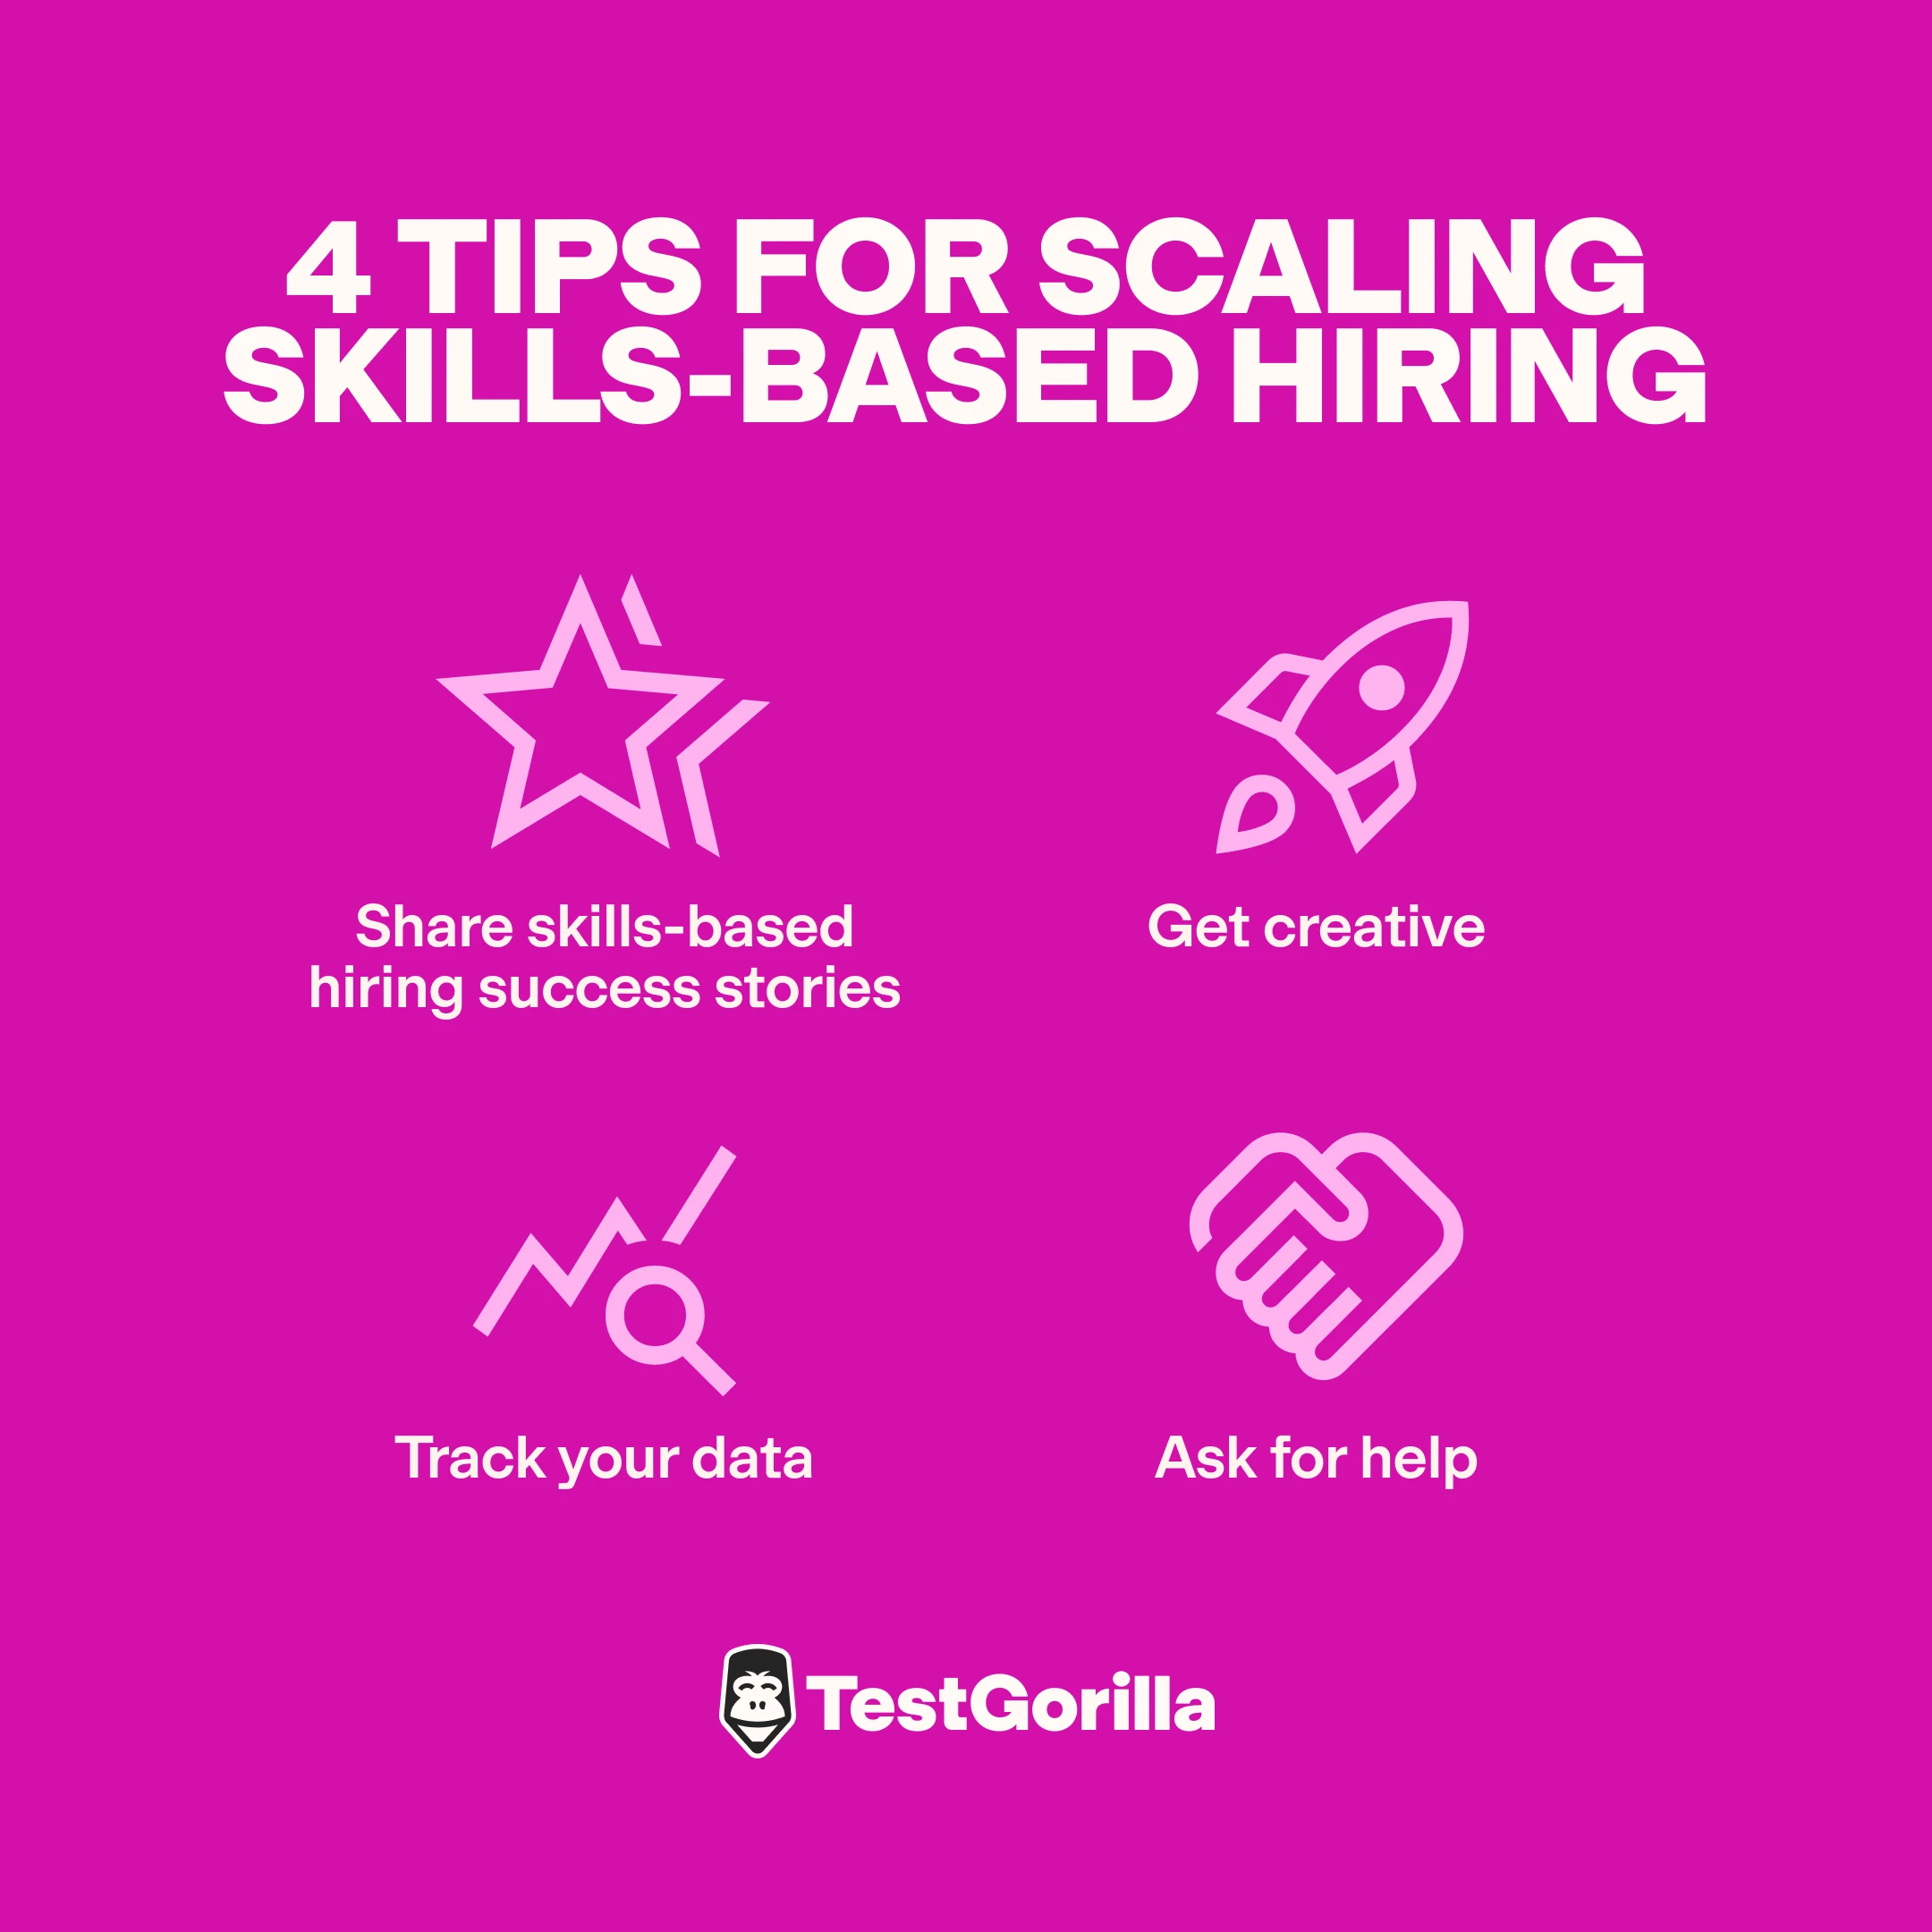 4 tips for scaling skills-based hiring in your organization